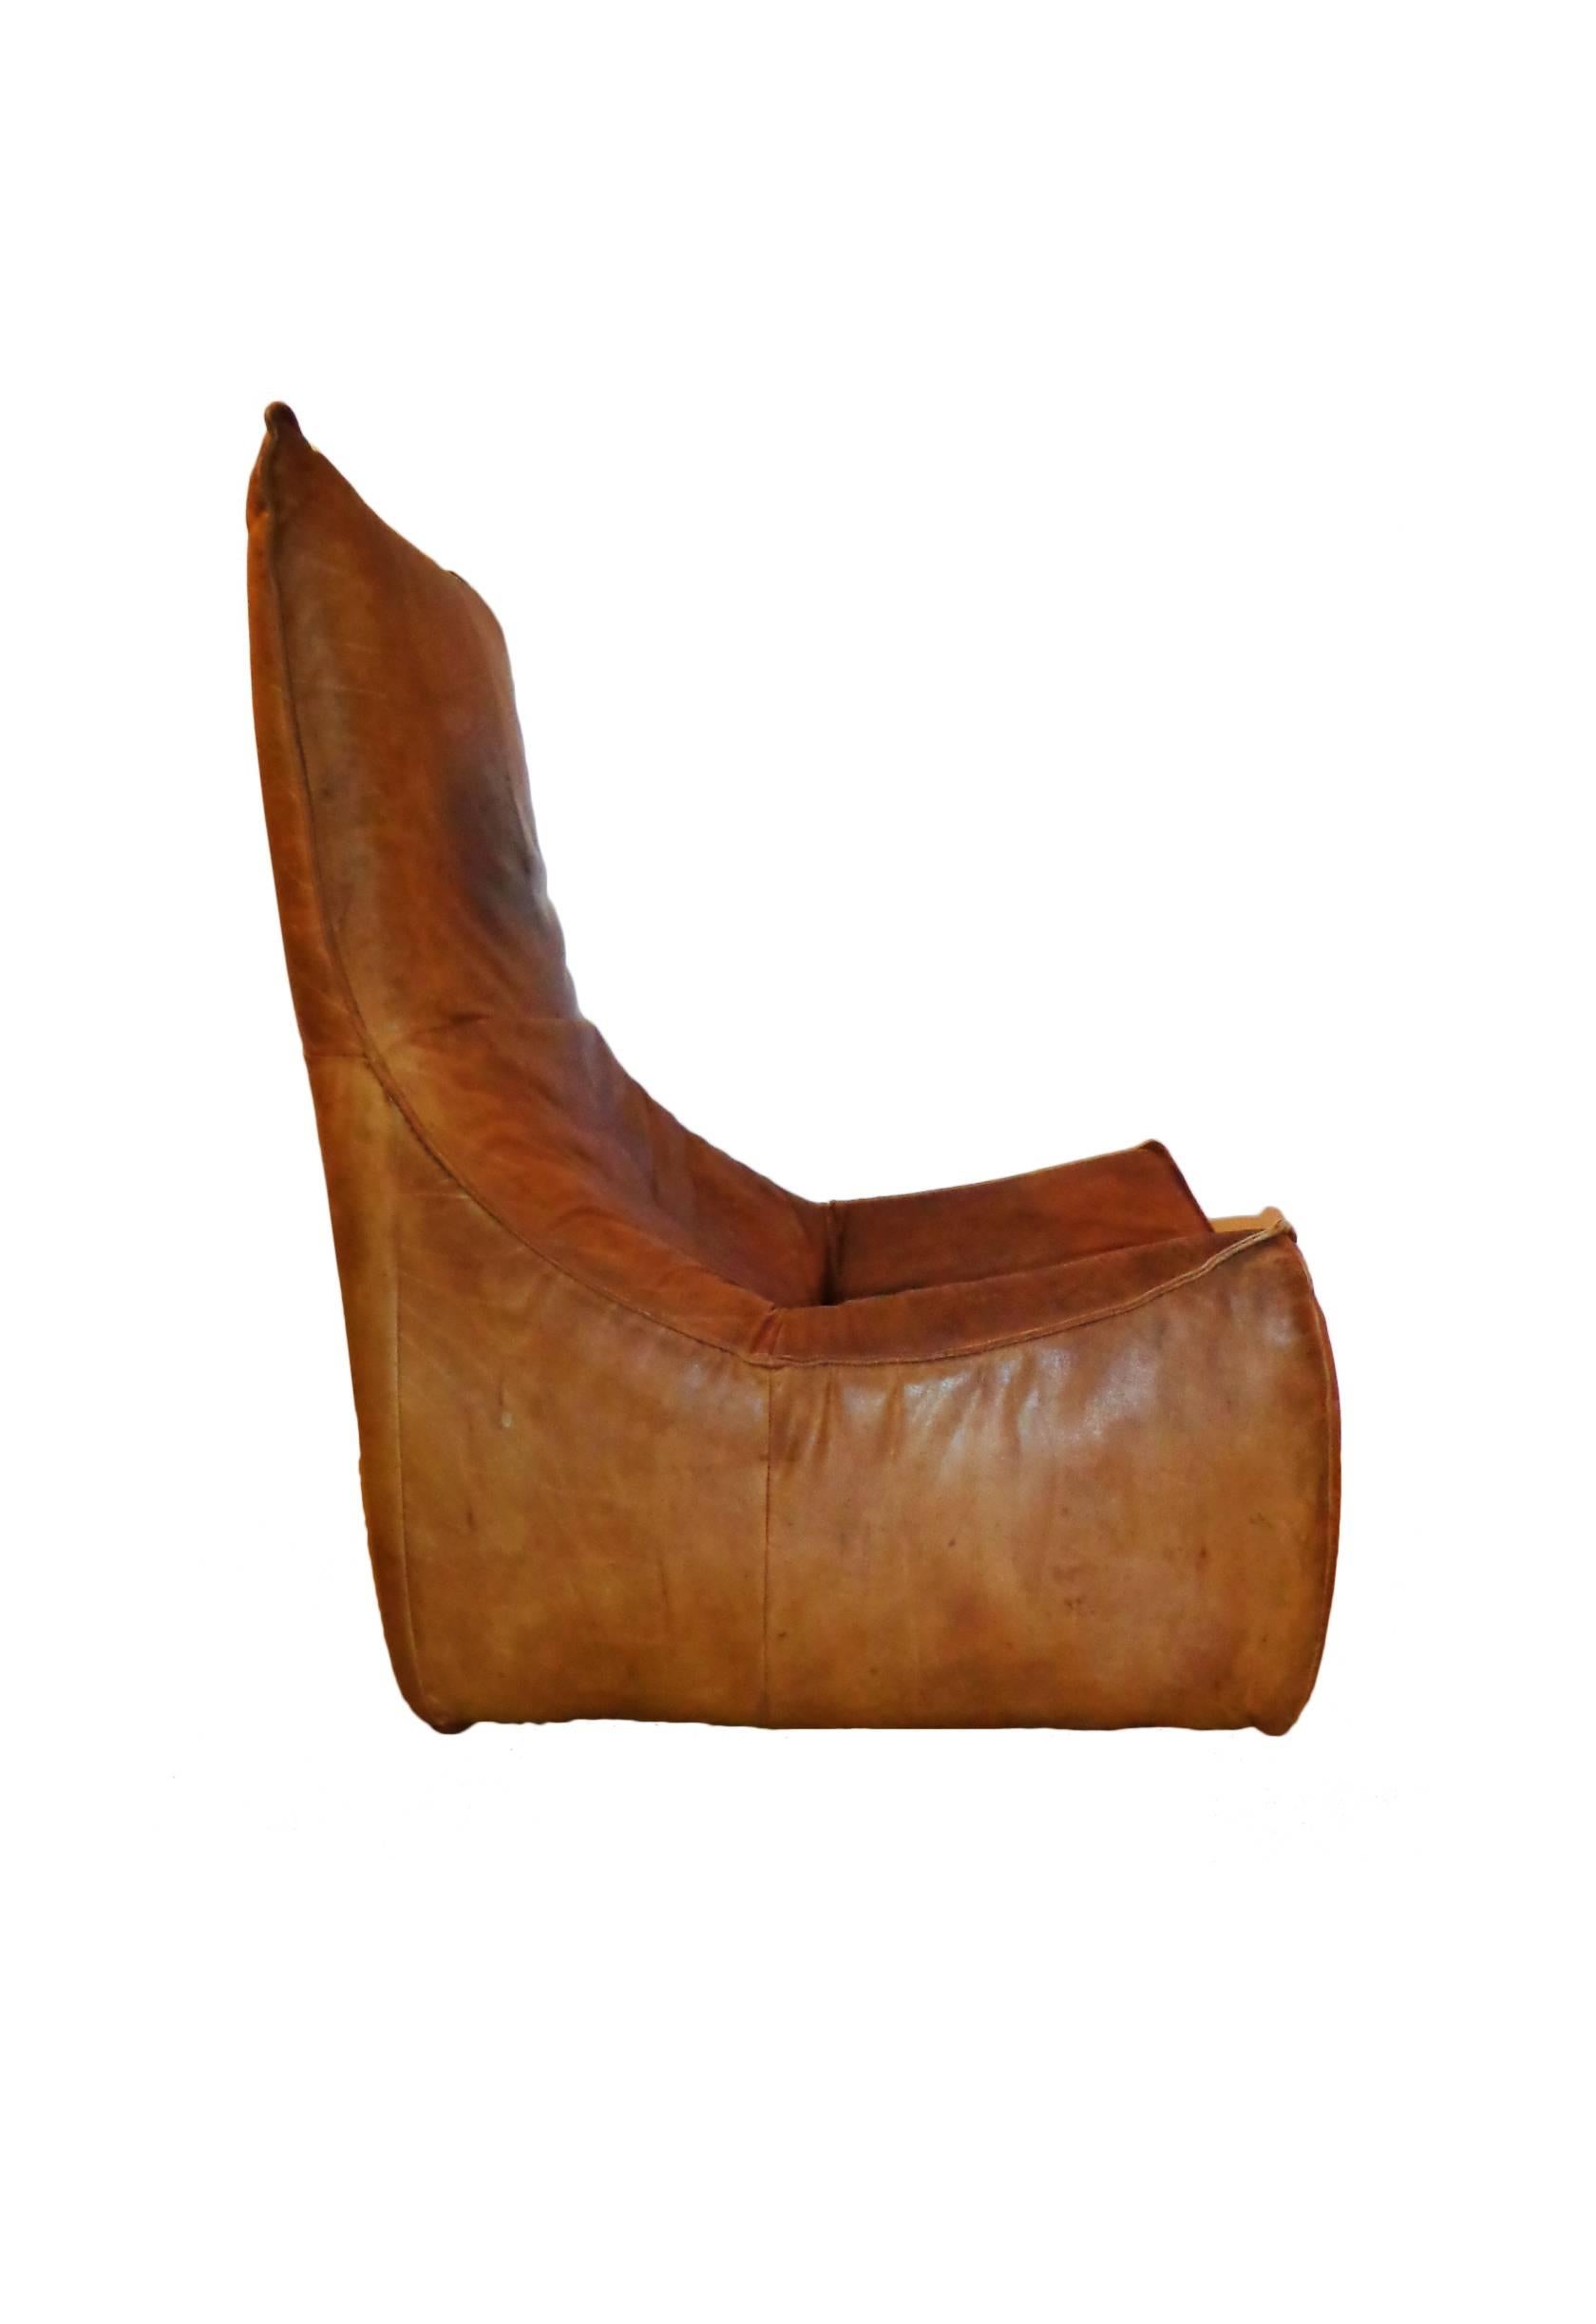 Late 20th Century Lounge Club Chair in Cognac Leather by Gerard Van Den Berg for Montis 1970 Dutch